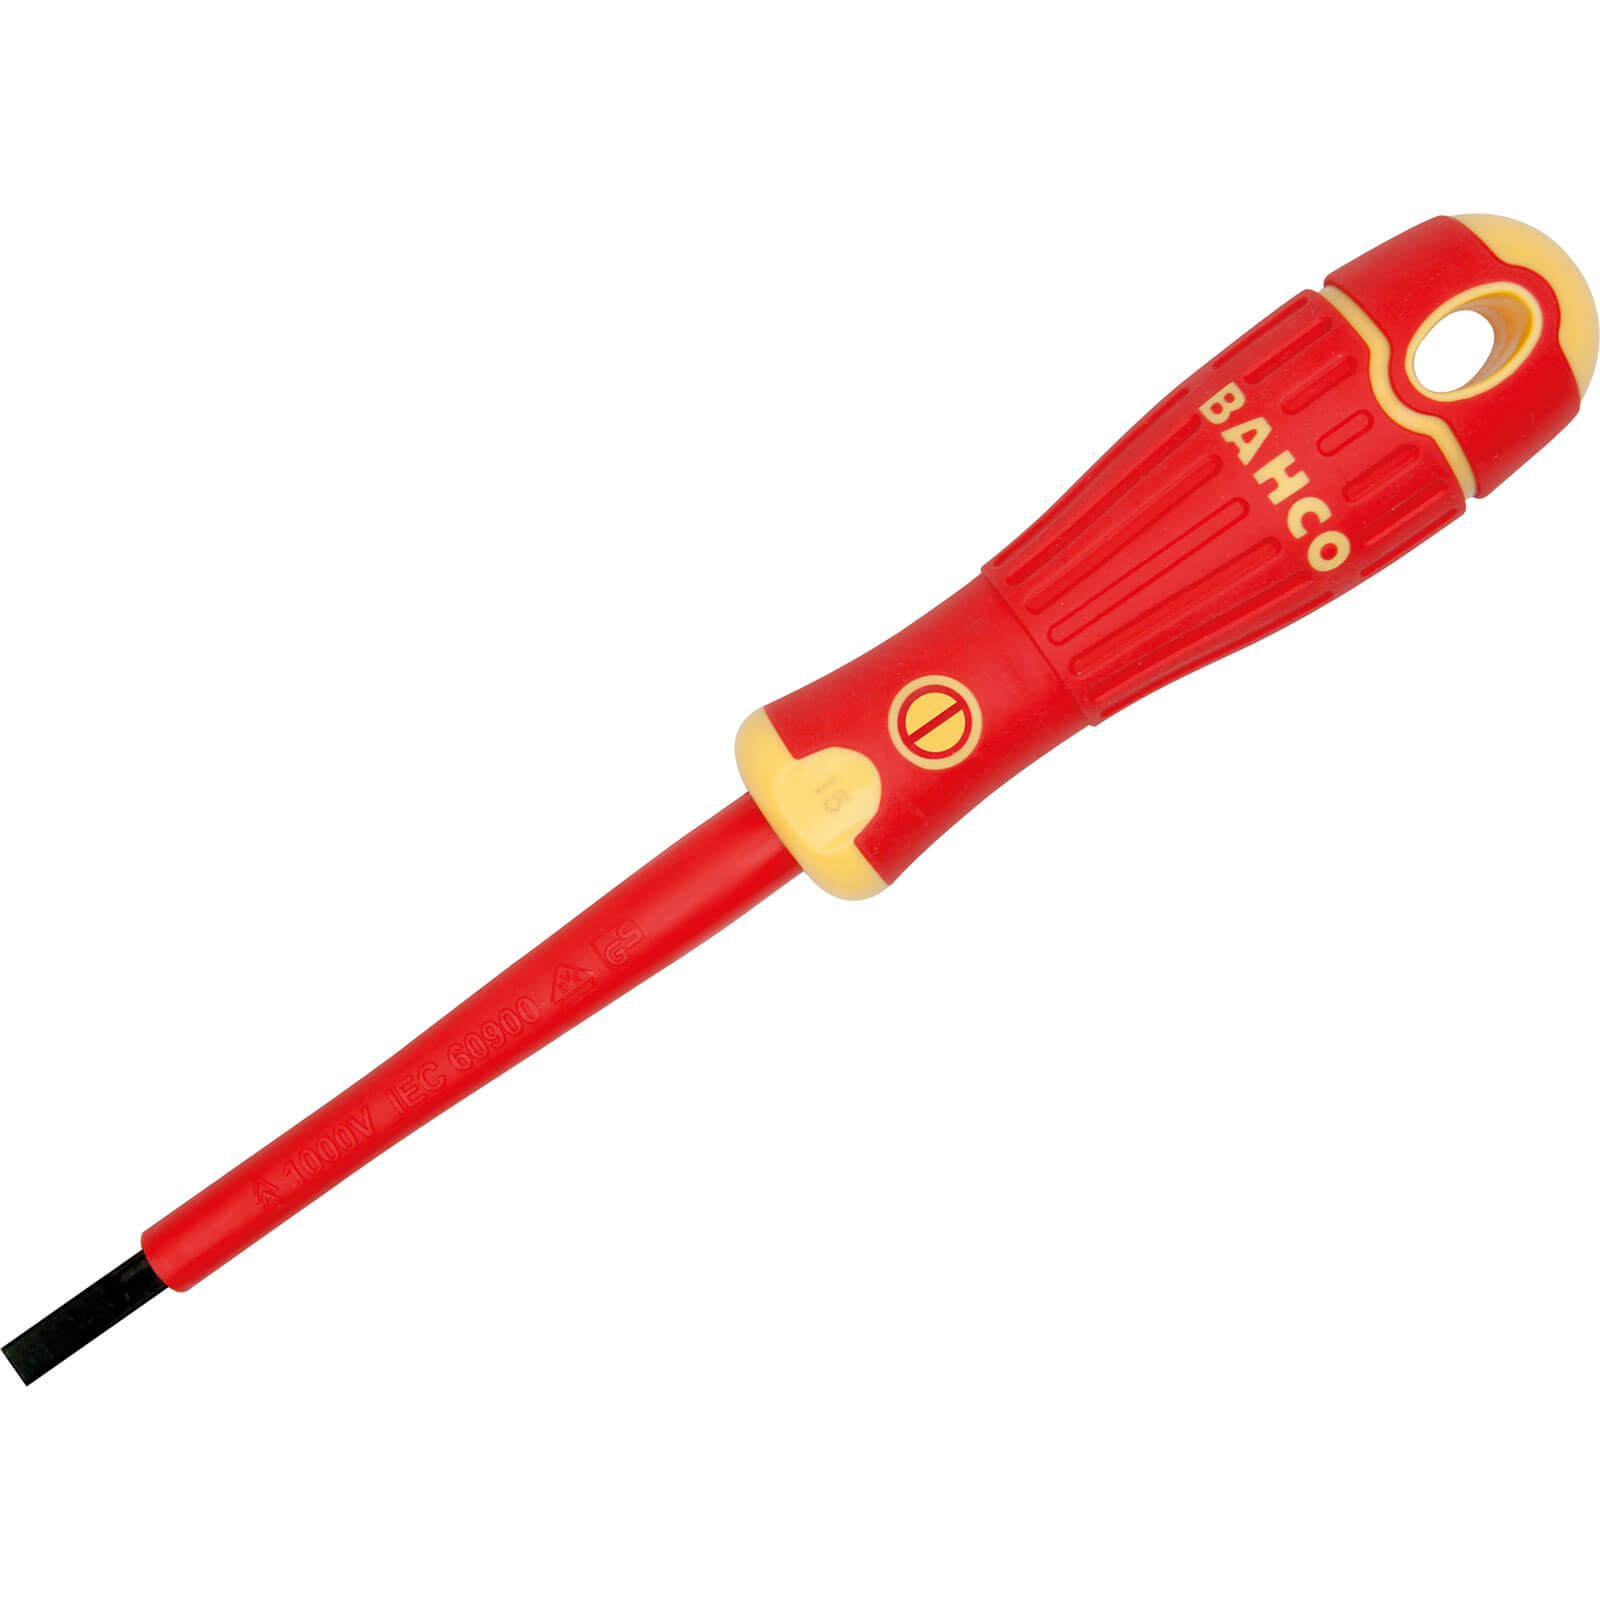 Photo of Bahco Vde Insulated Slotted Screwdriver 5.5mm 125mm